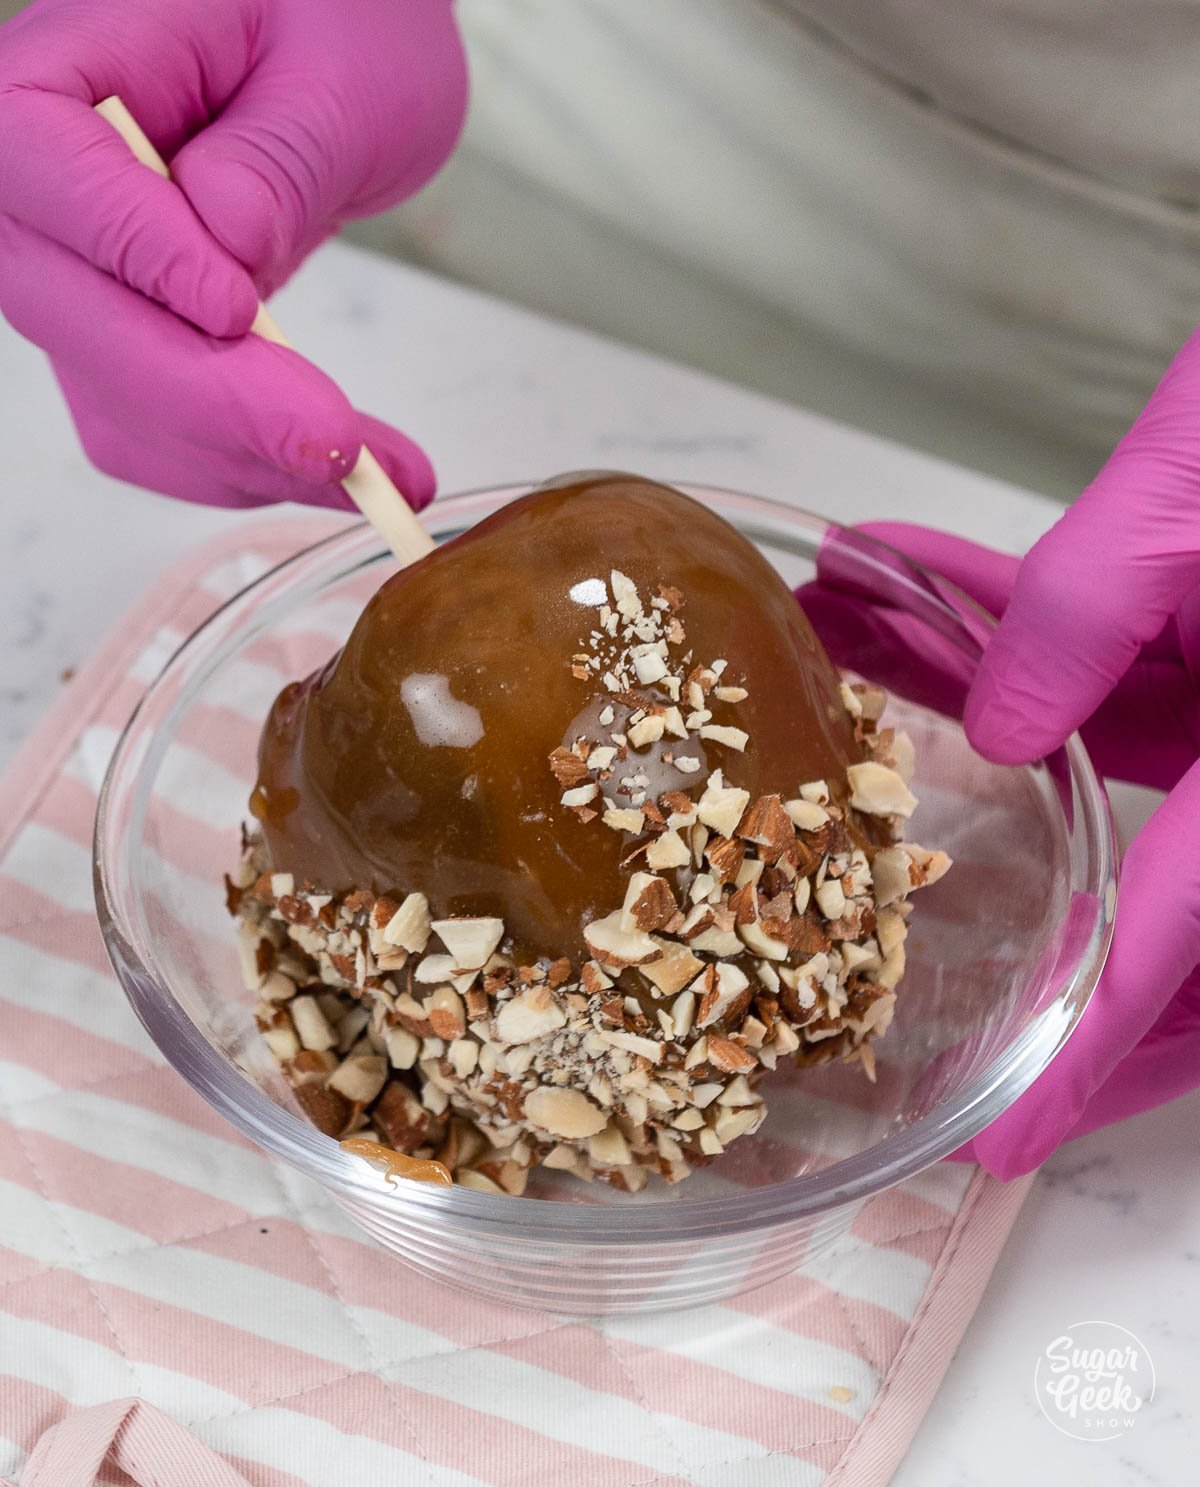 adding toppings to caramel apples